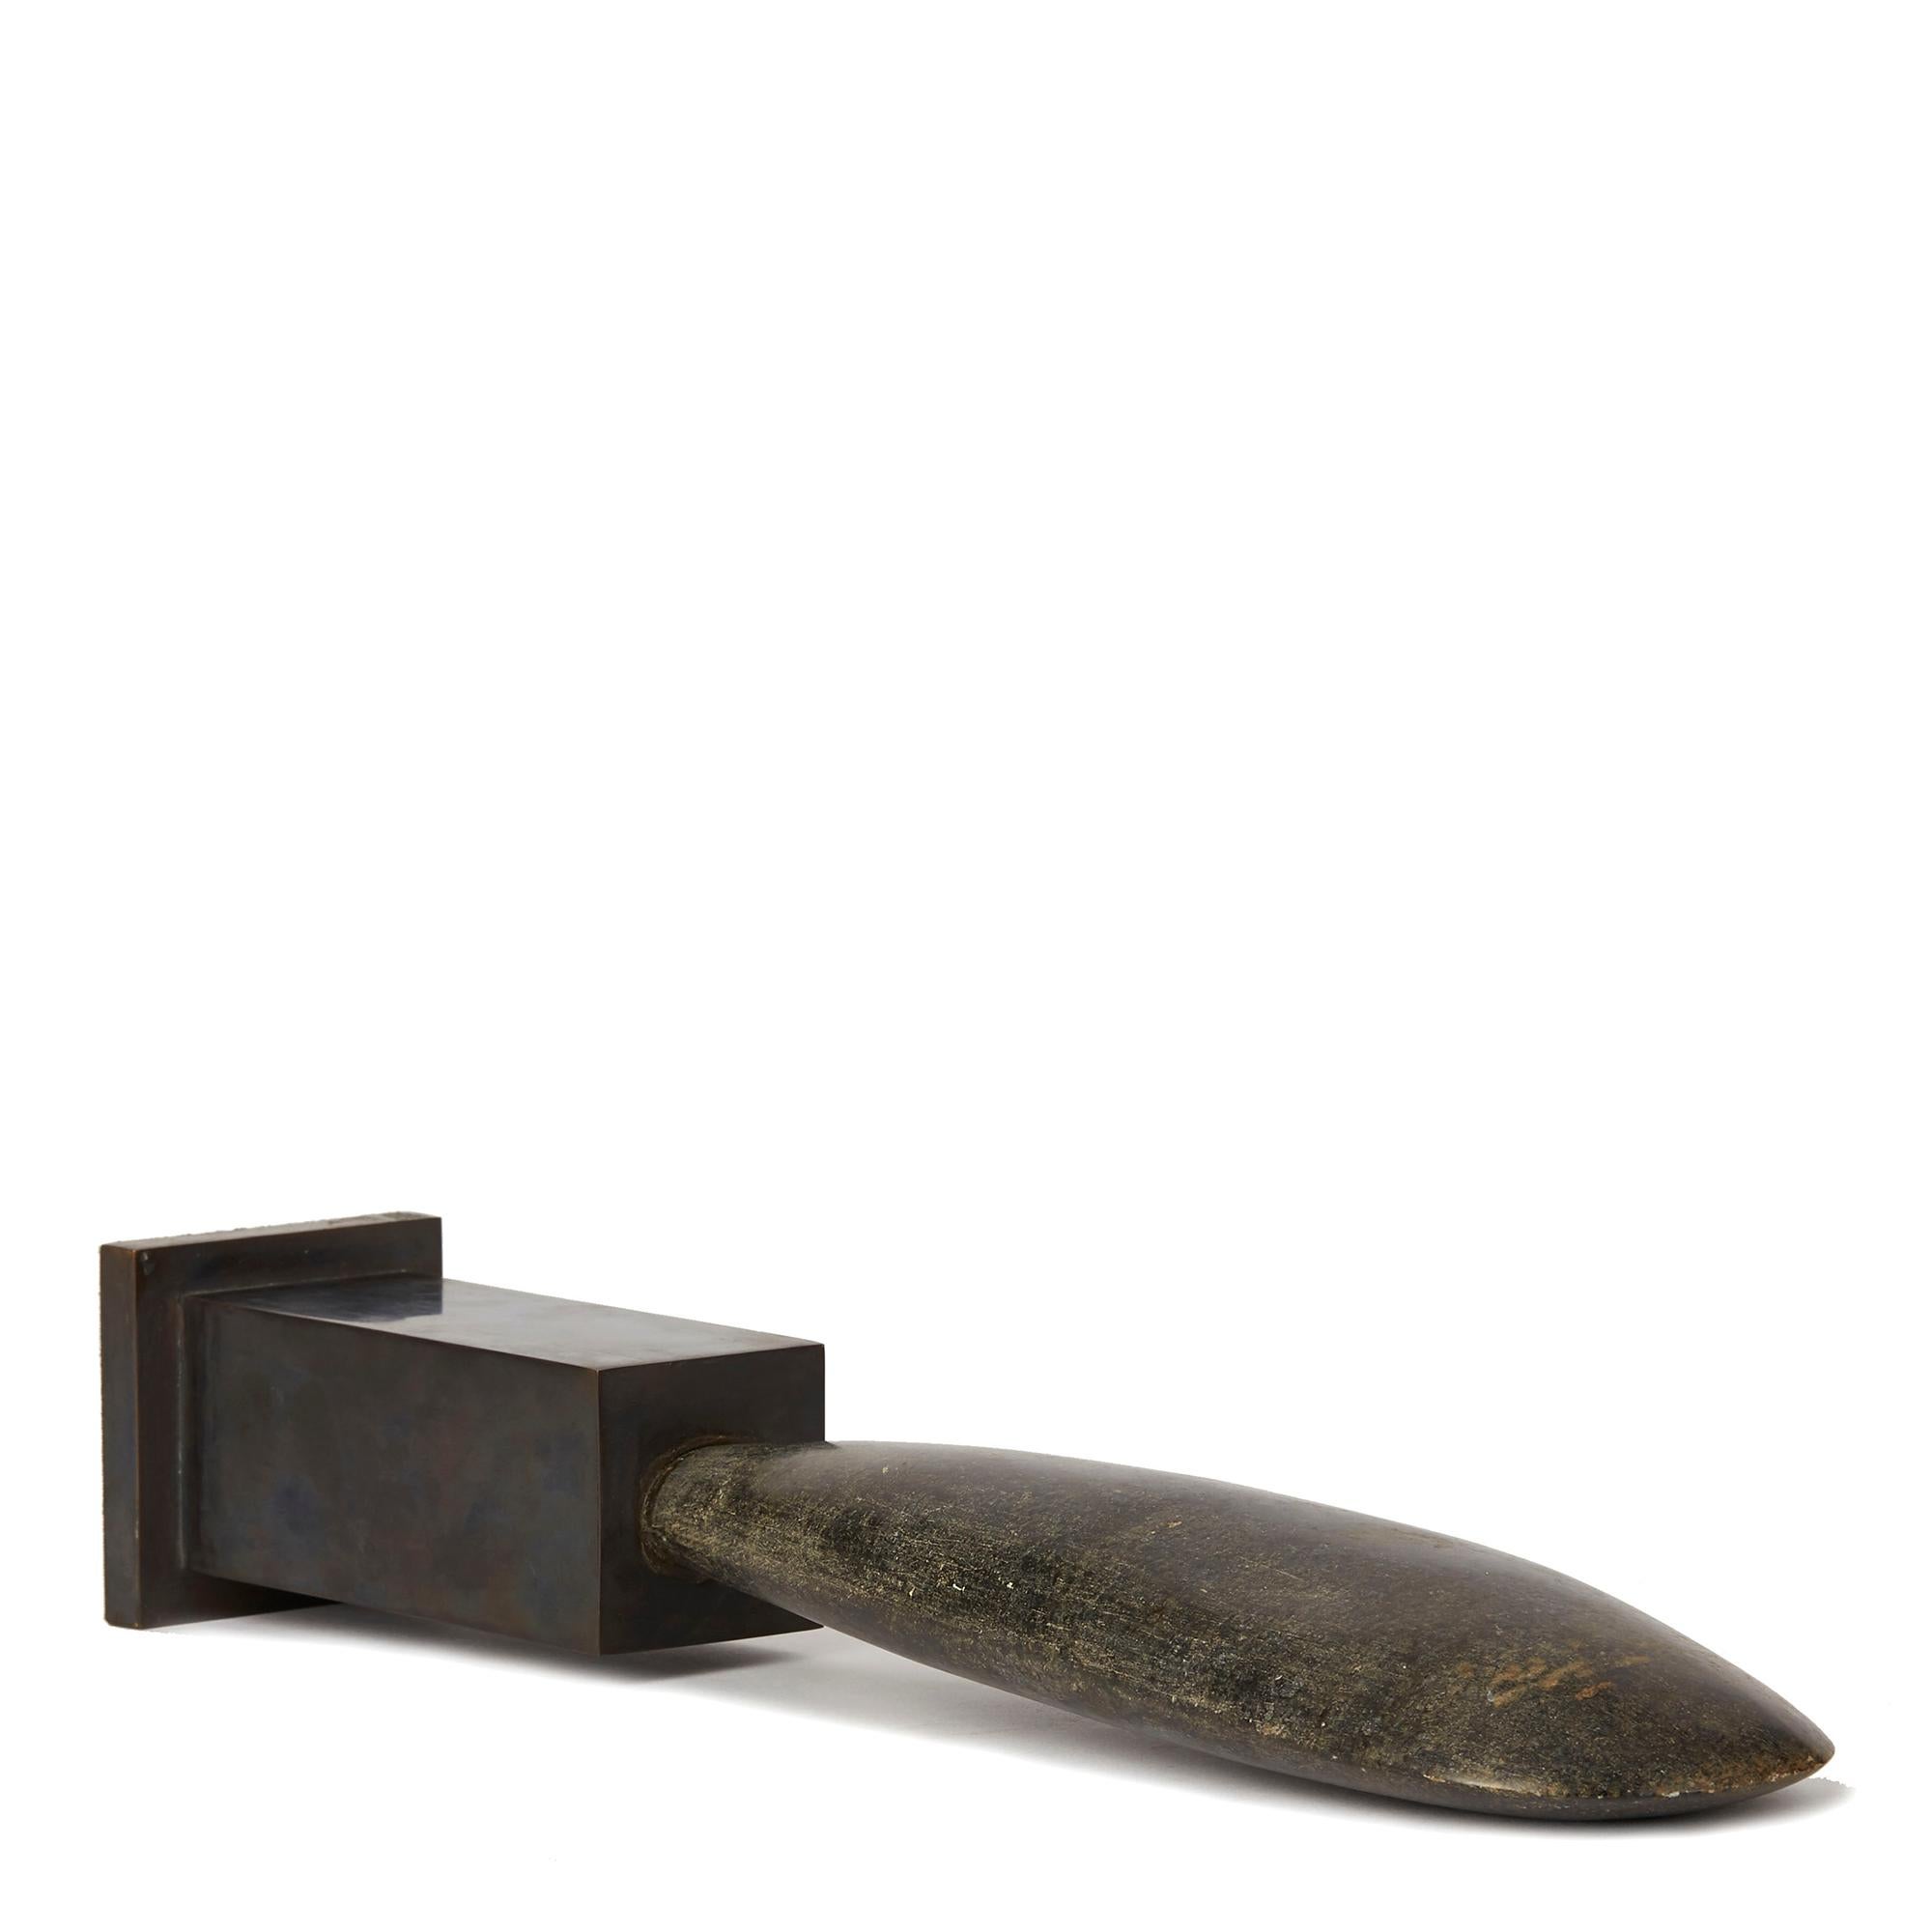 Papau New Guinea Sentani Mounted Nephrite Axe, Early 20th Century For Sale 1